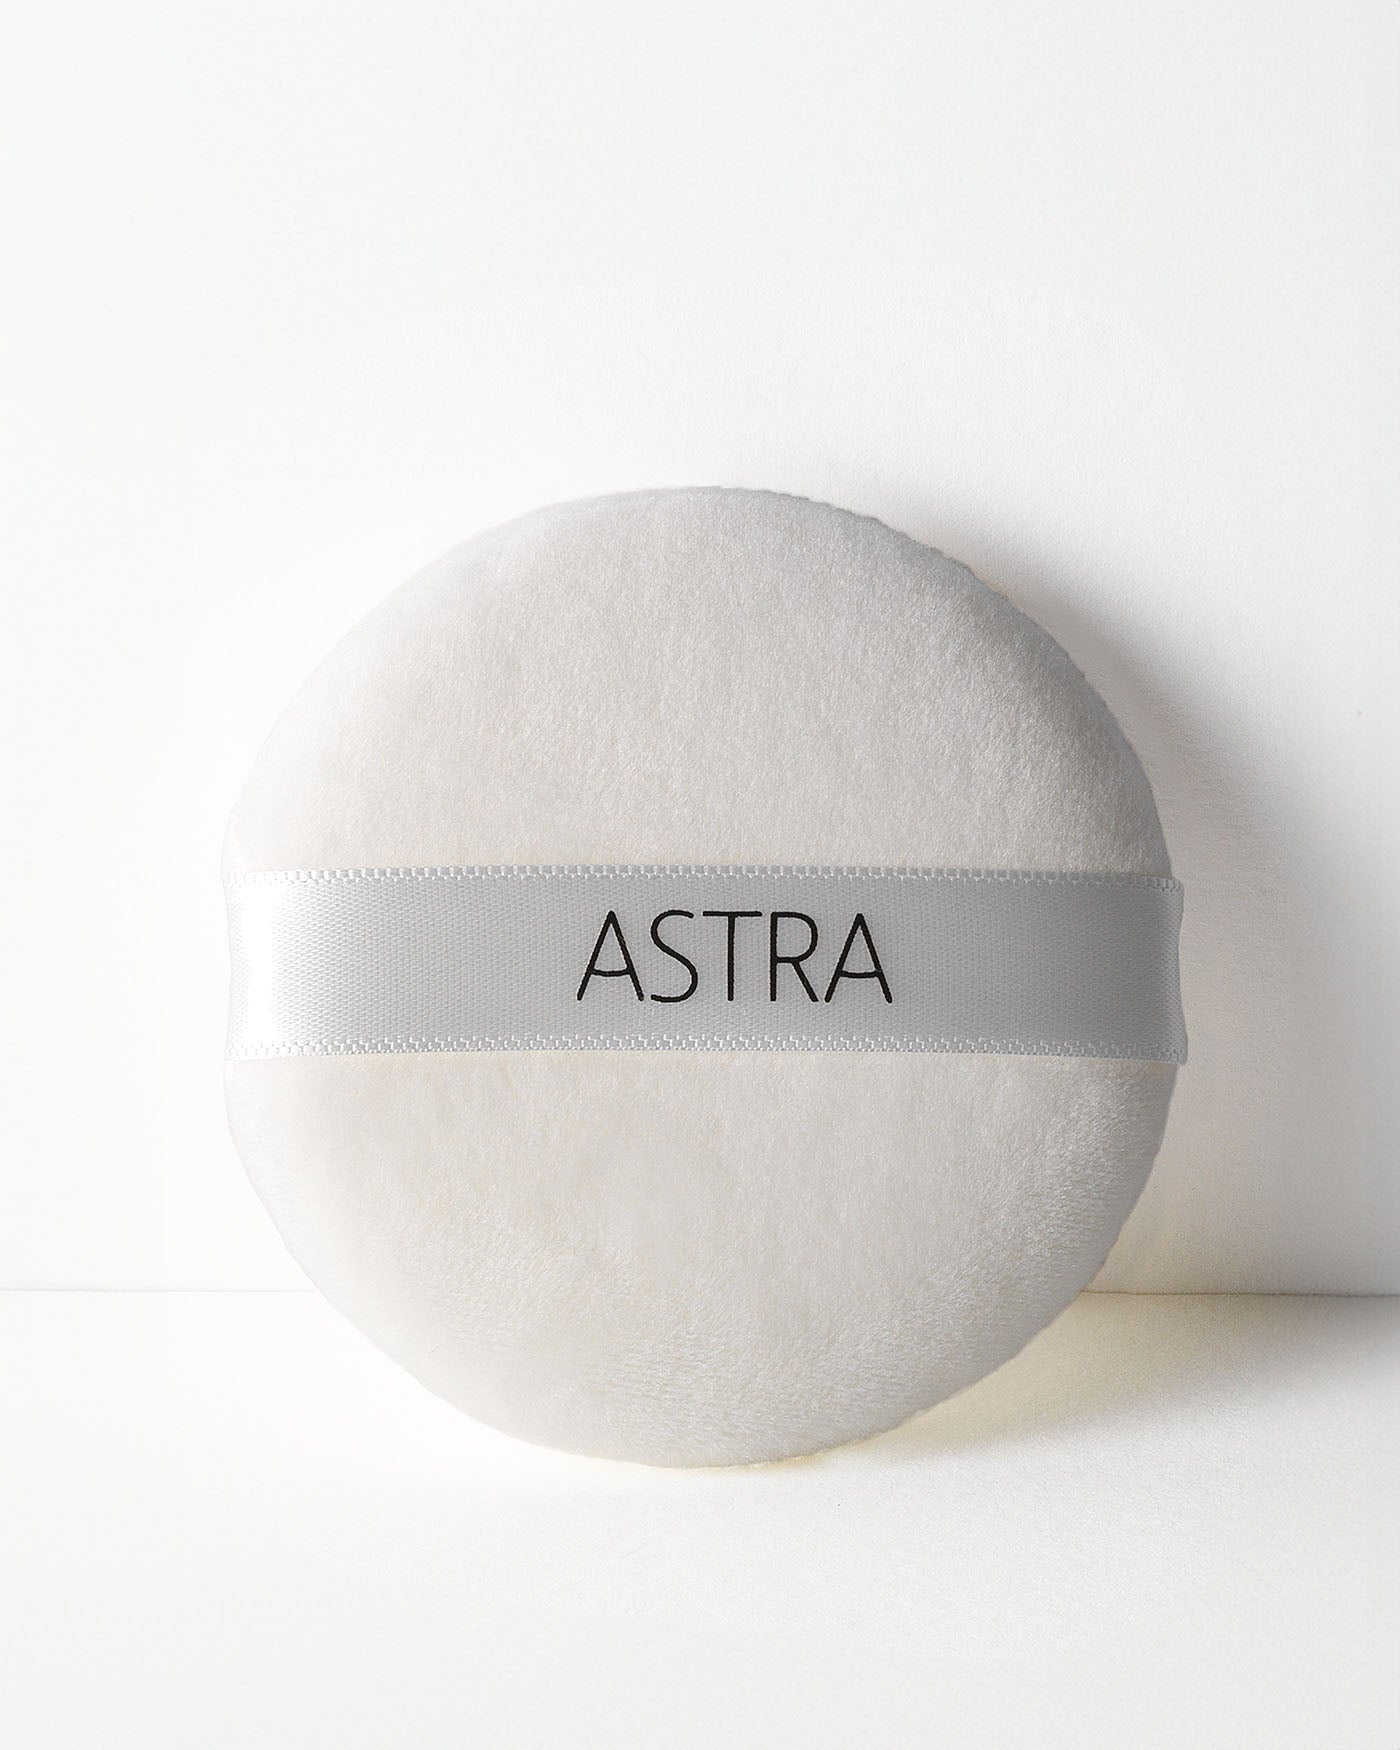 POWDER PUFF - All Products - Astra Make-Up